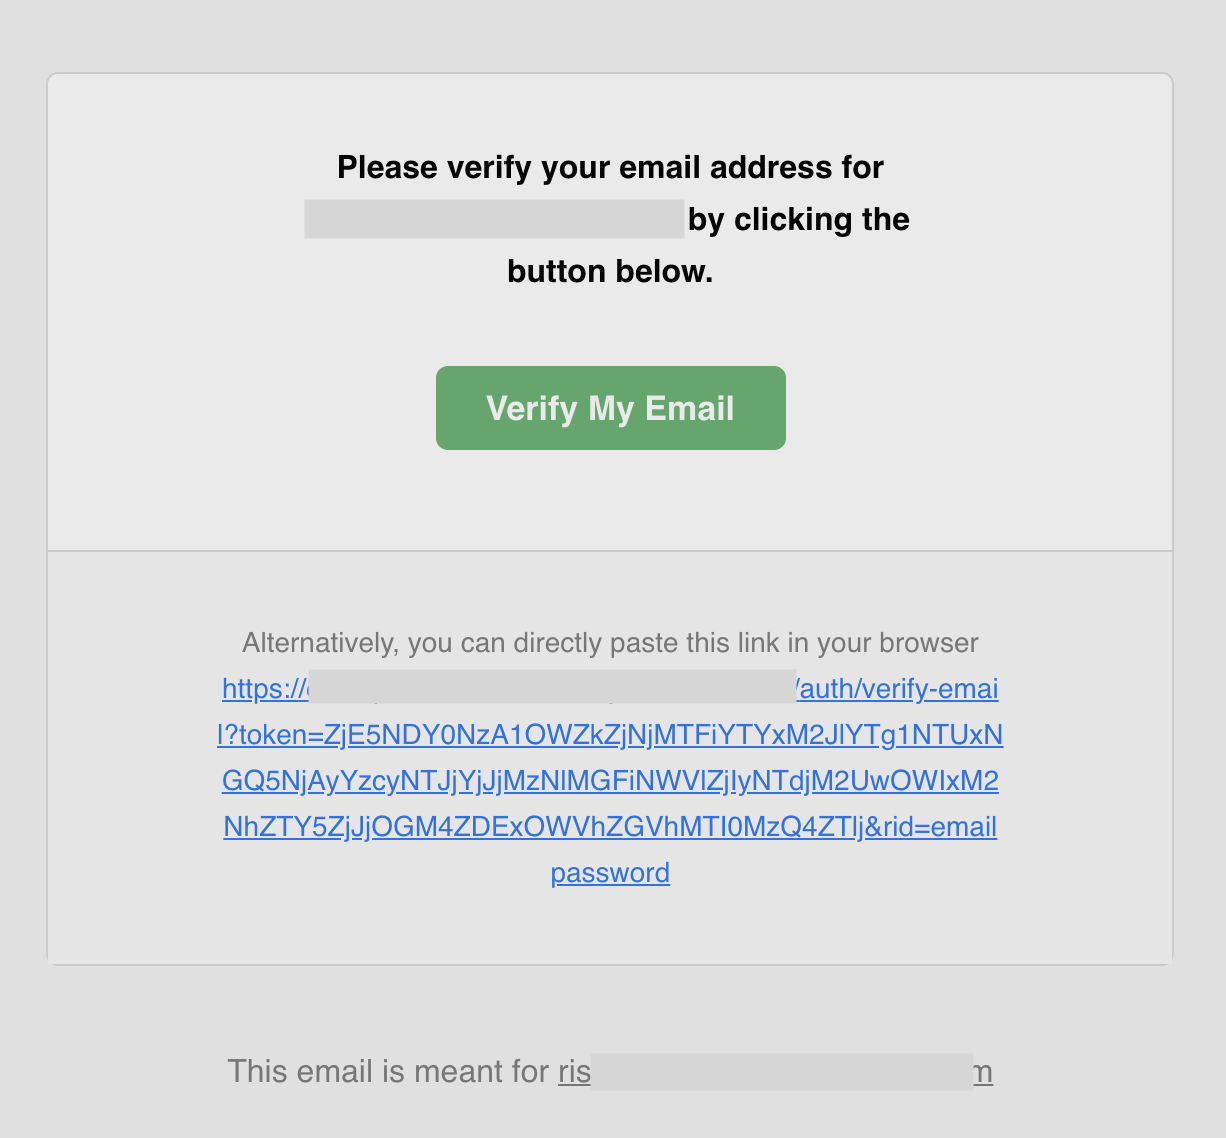 UI of the verification email sent to the registered user